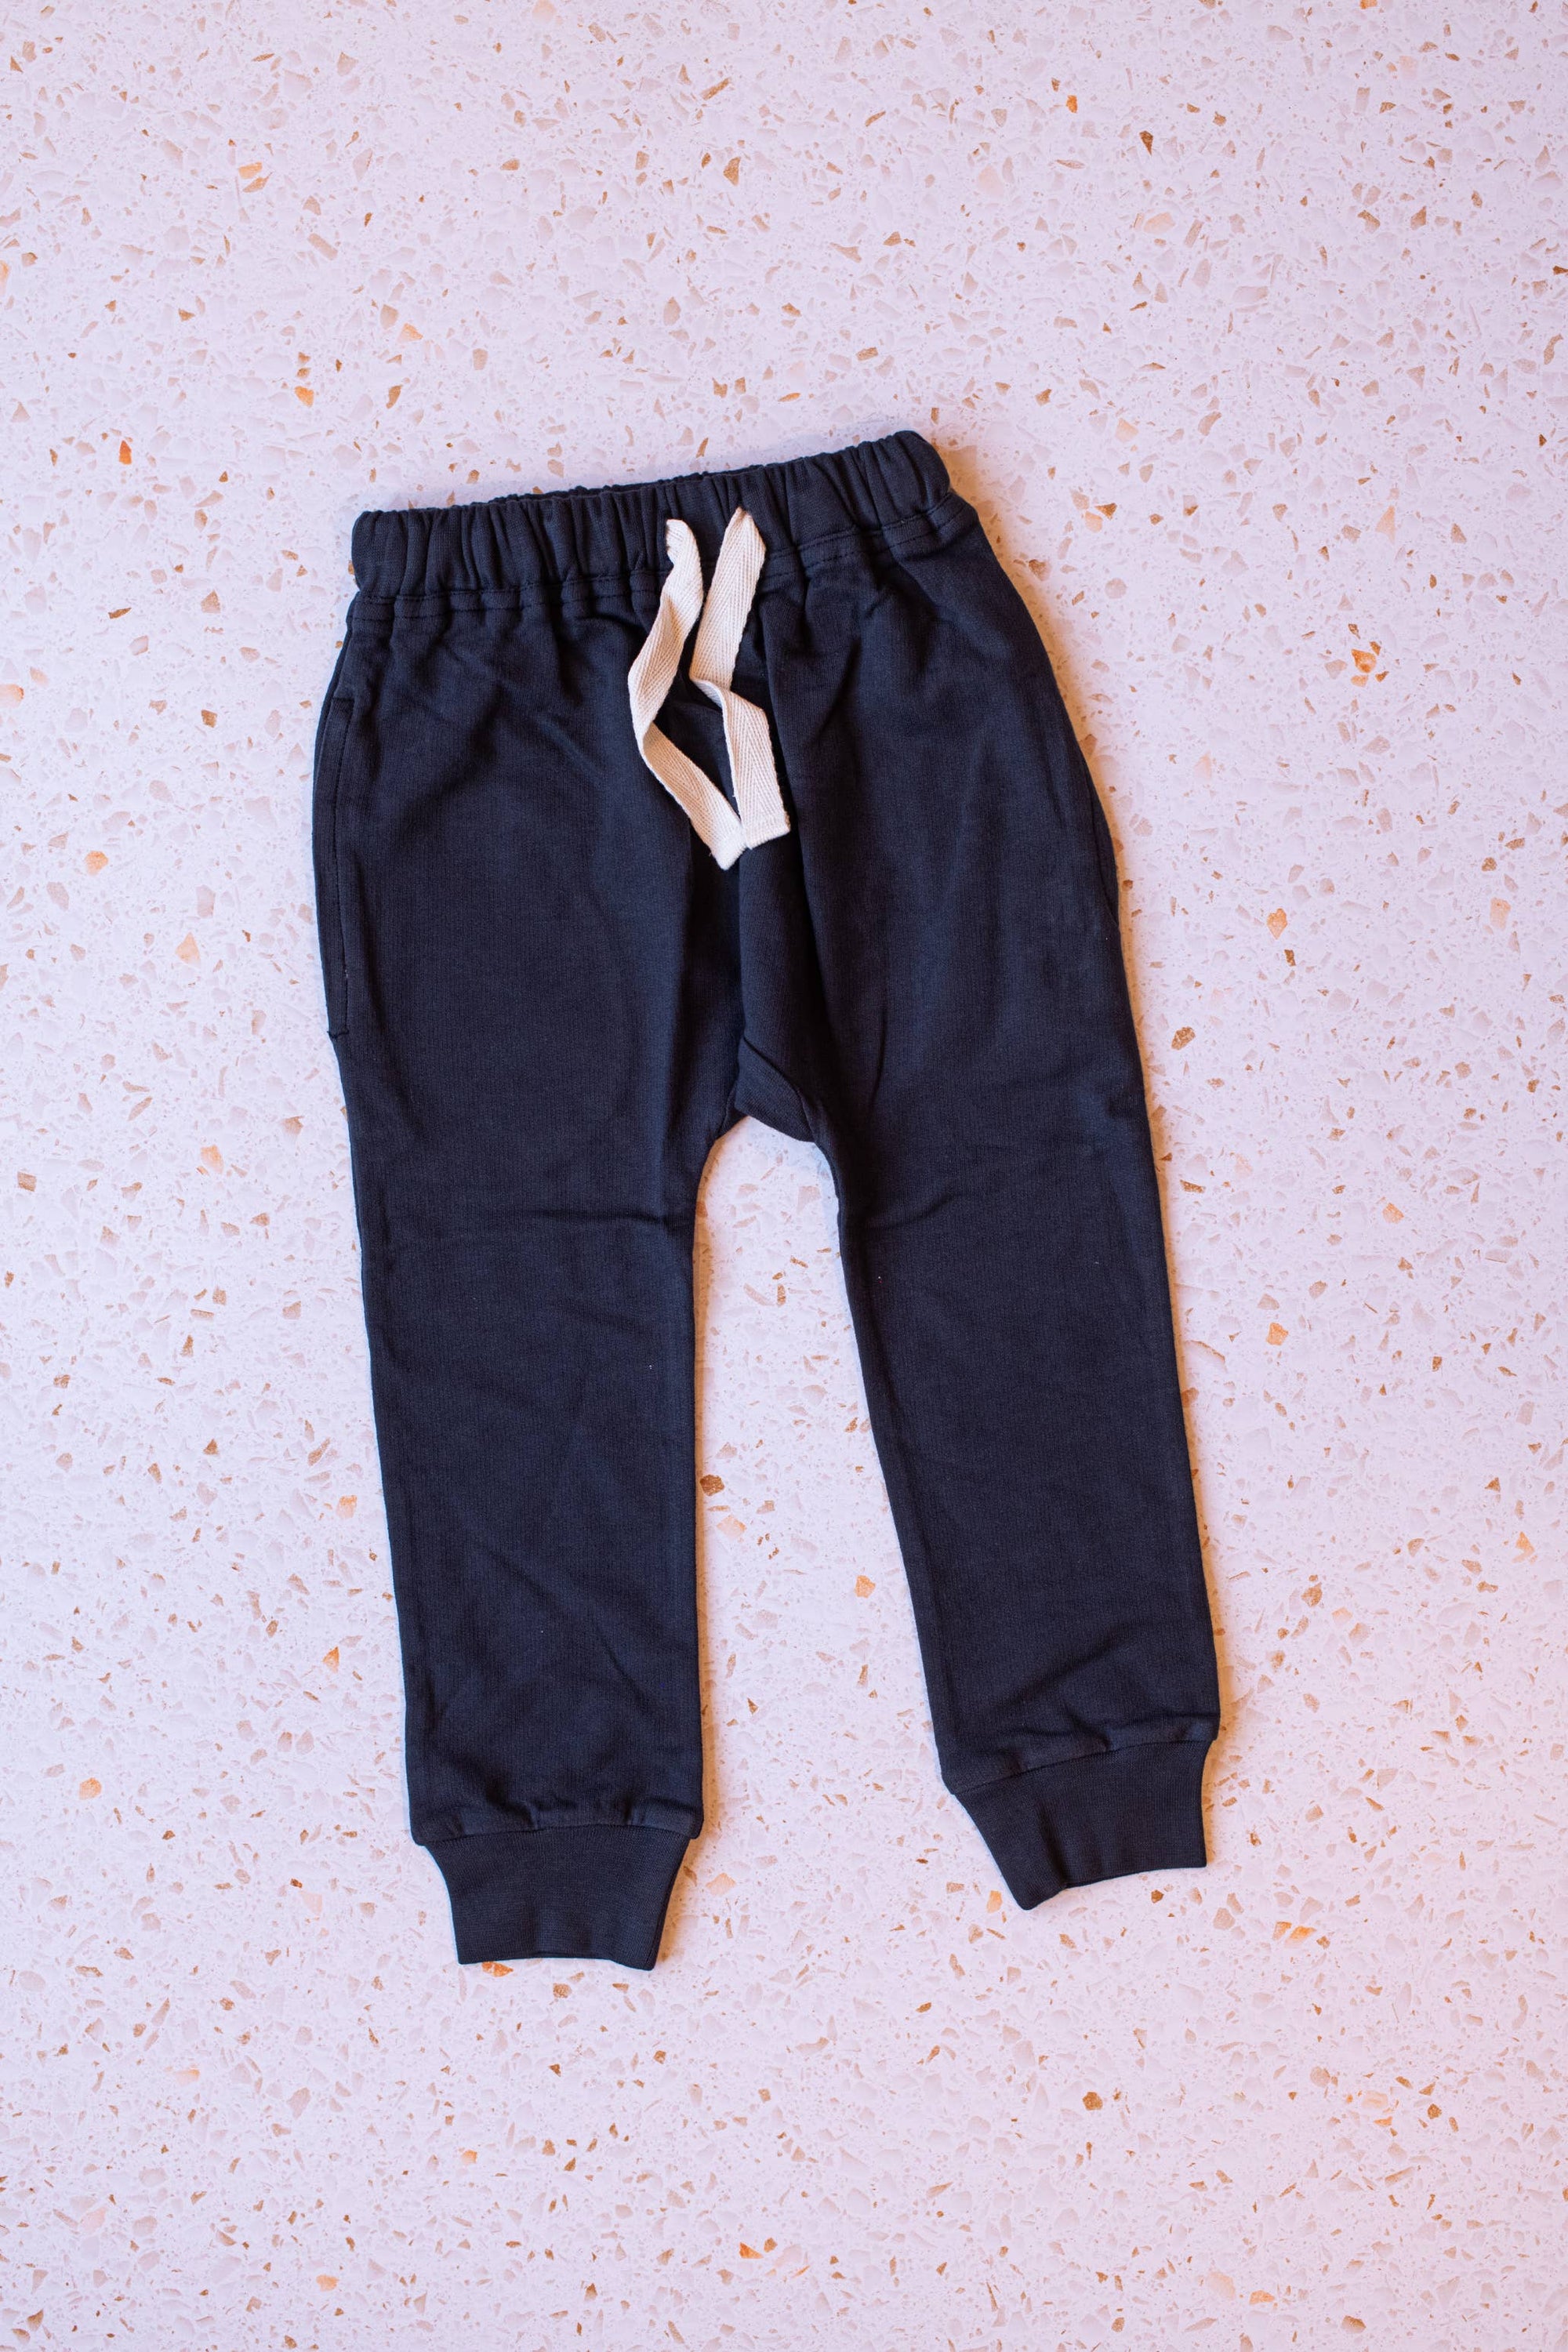 Kids Joggers in Charcoal